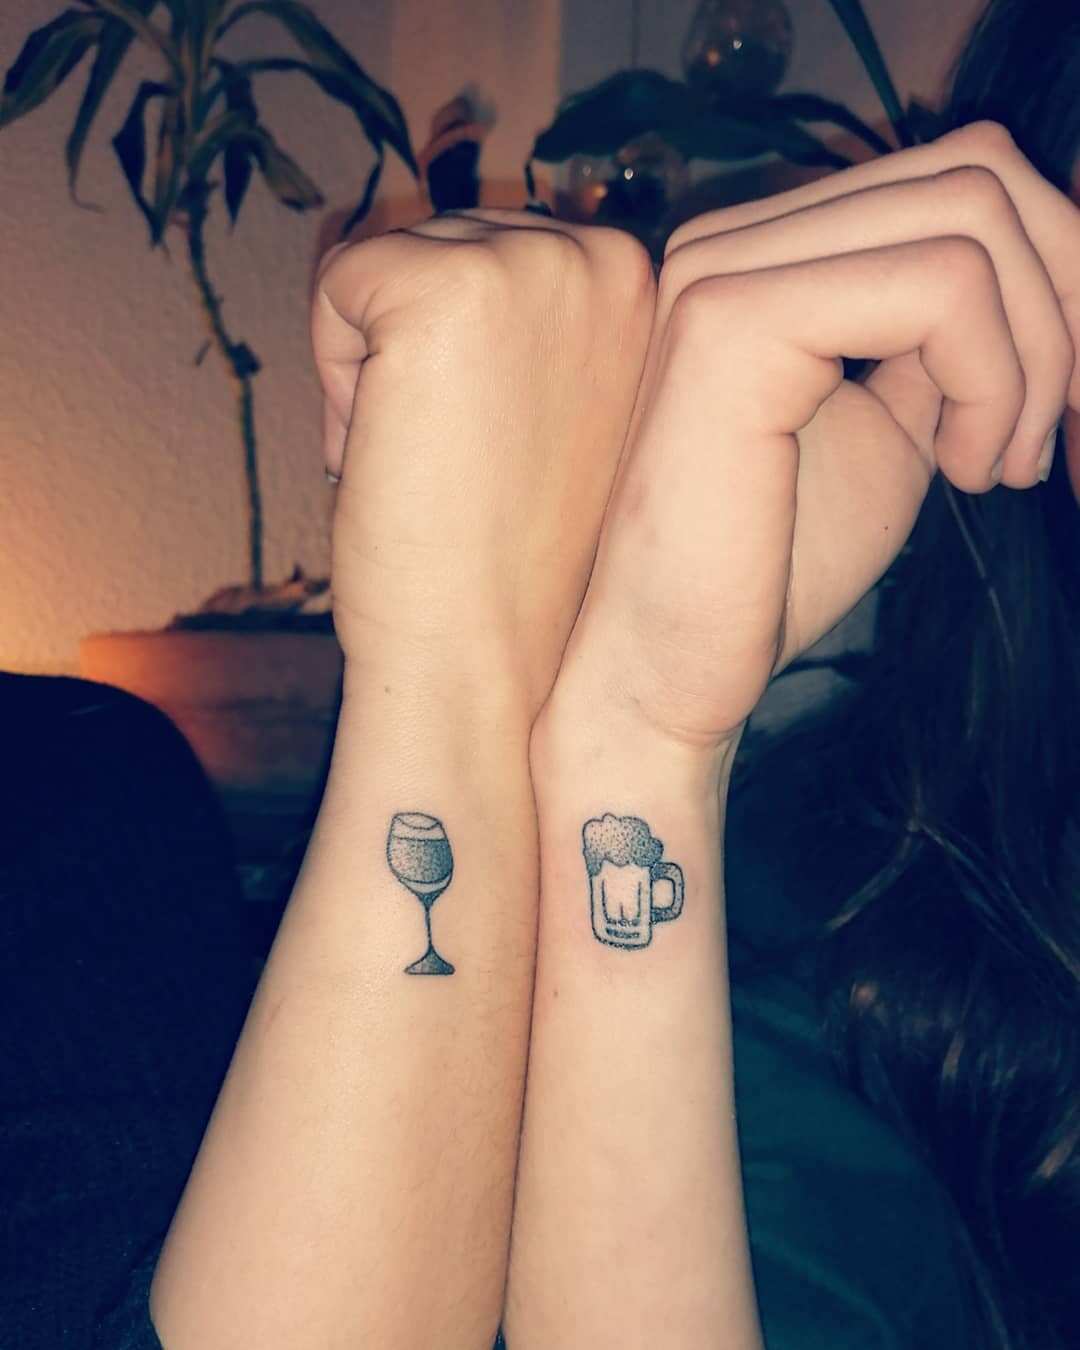 Best Friend Tattoos  A Perfect Way To Express Your Friendship